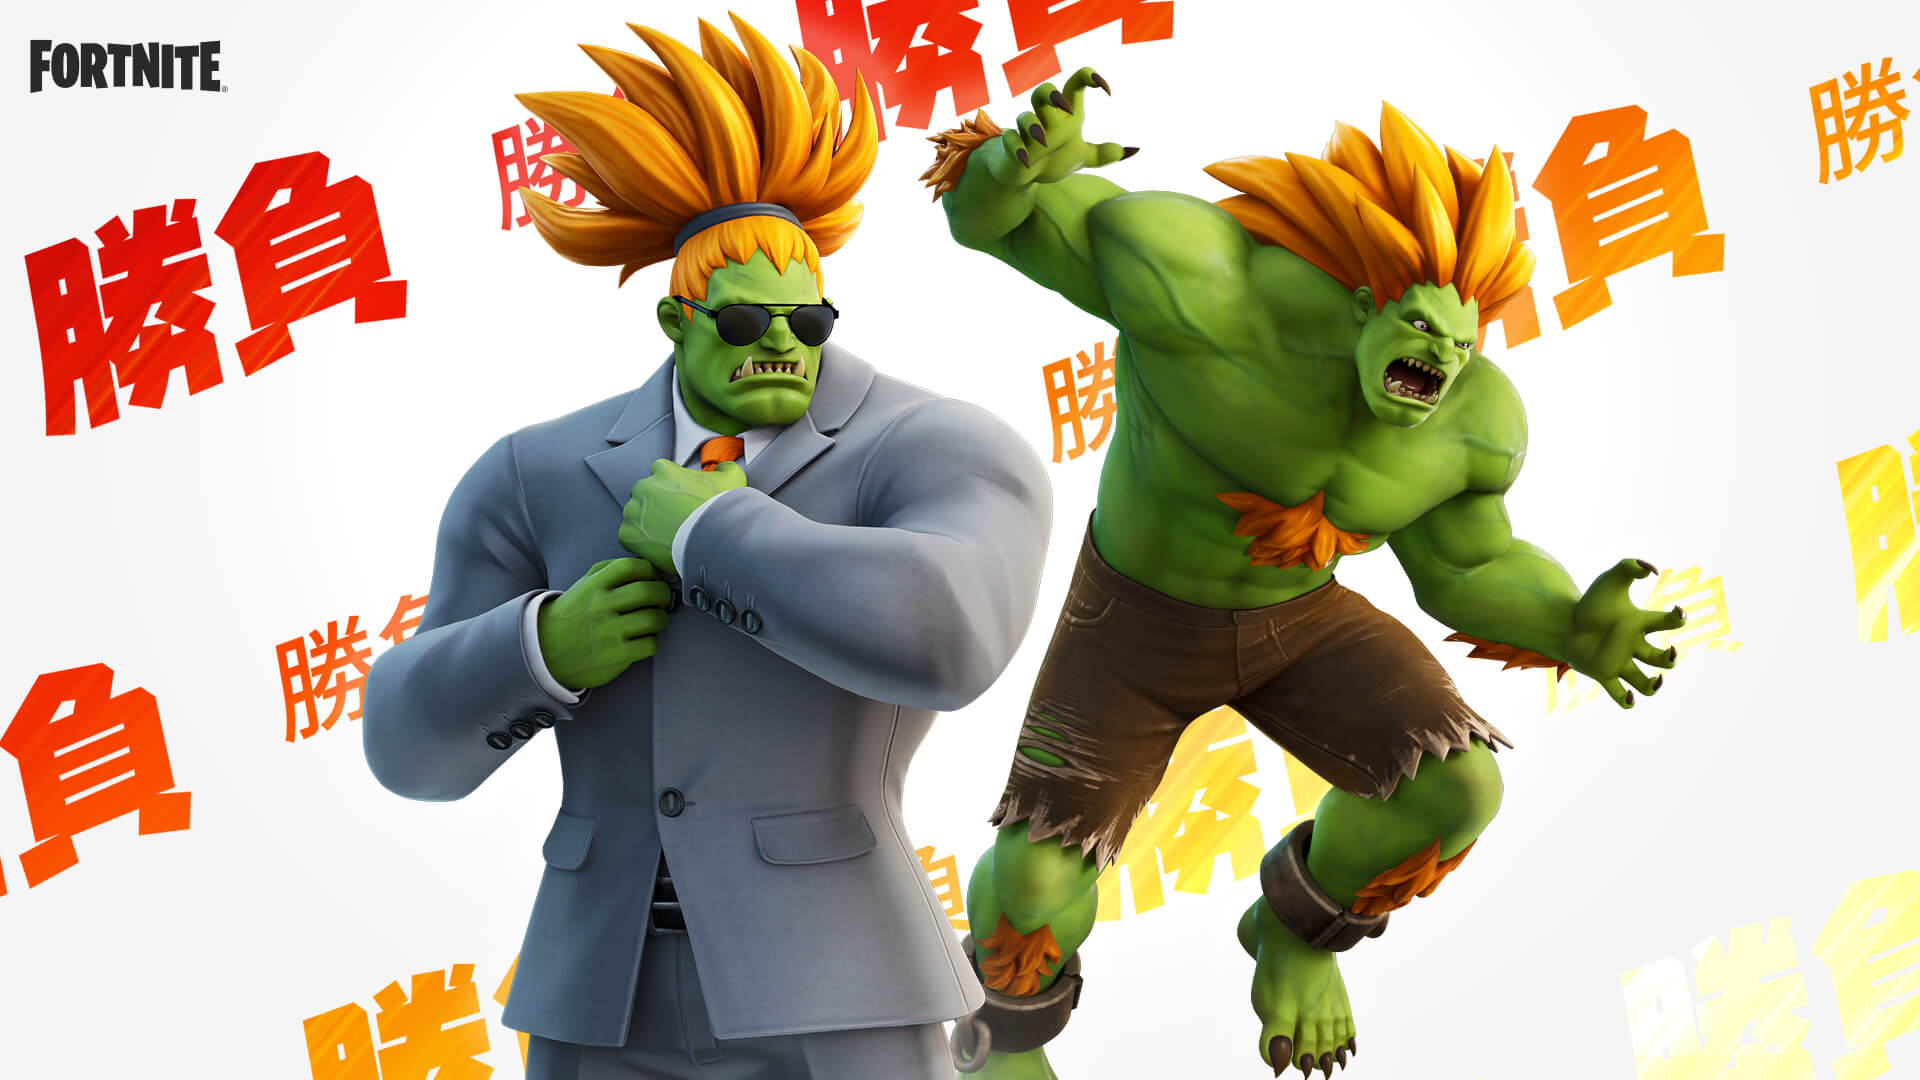 Blanka wearing a suit and not wearing a suit in artwork from Fortnite